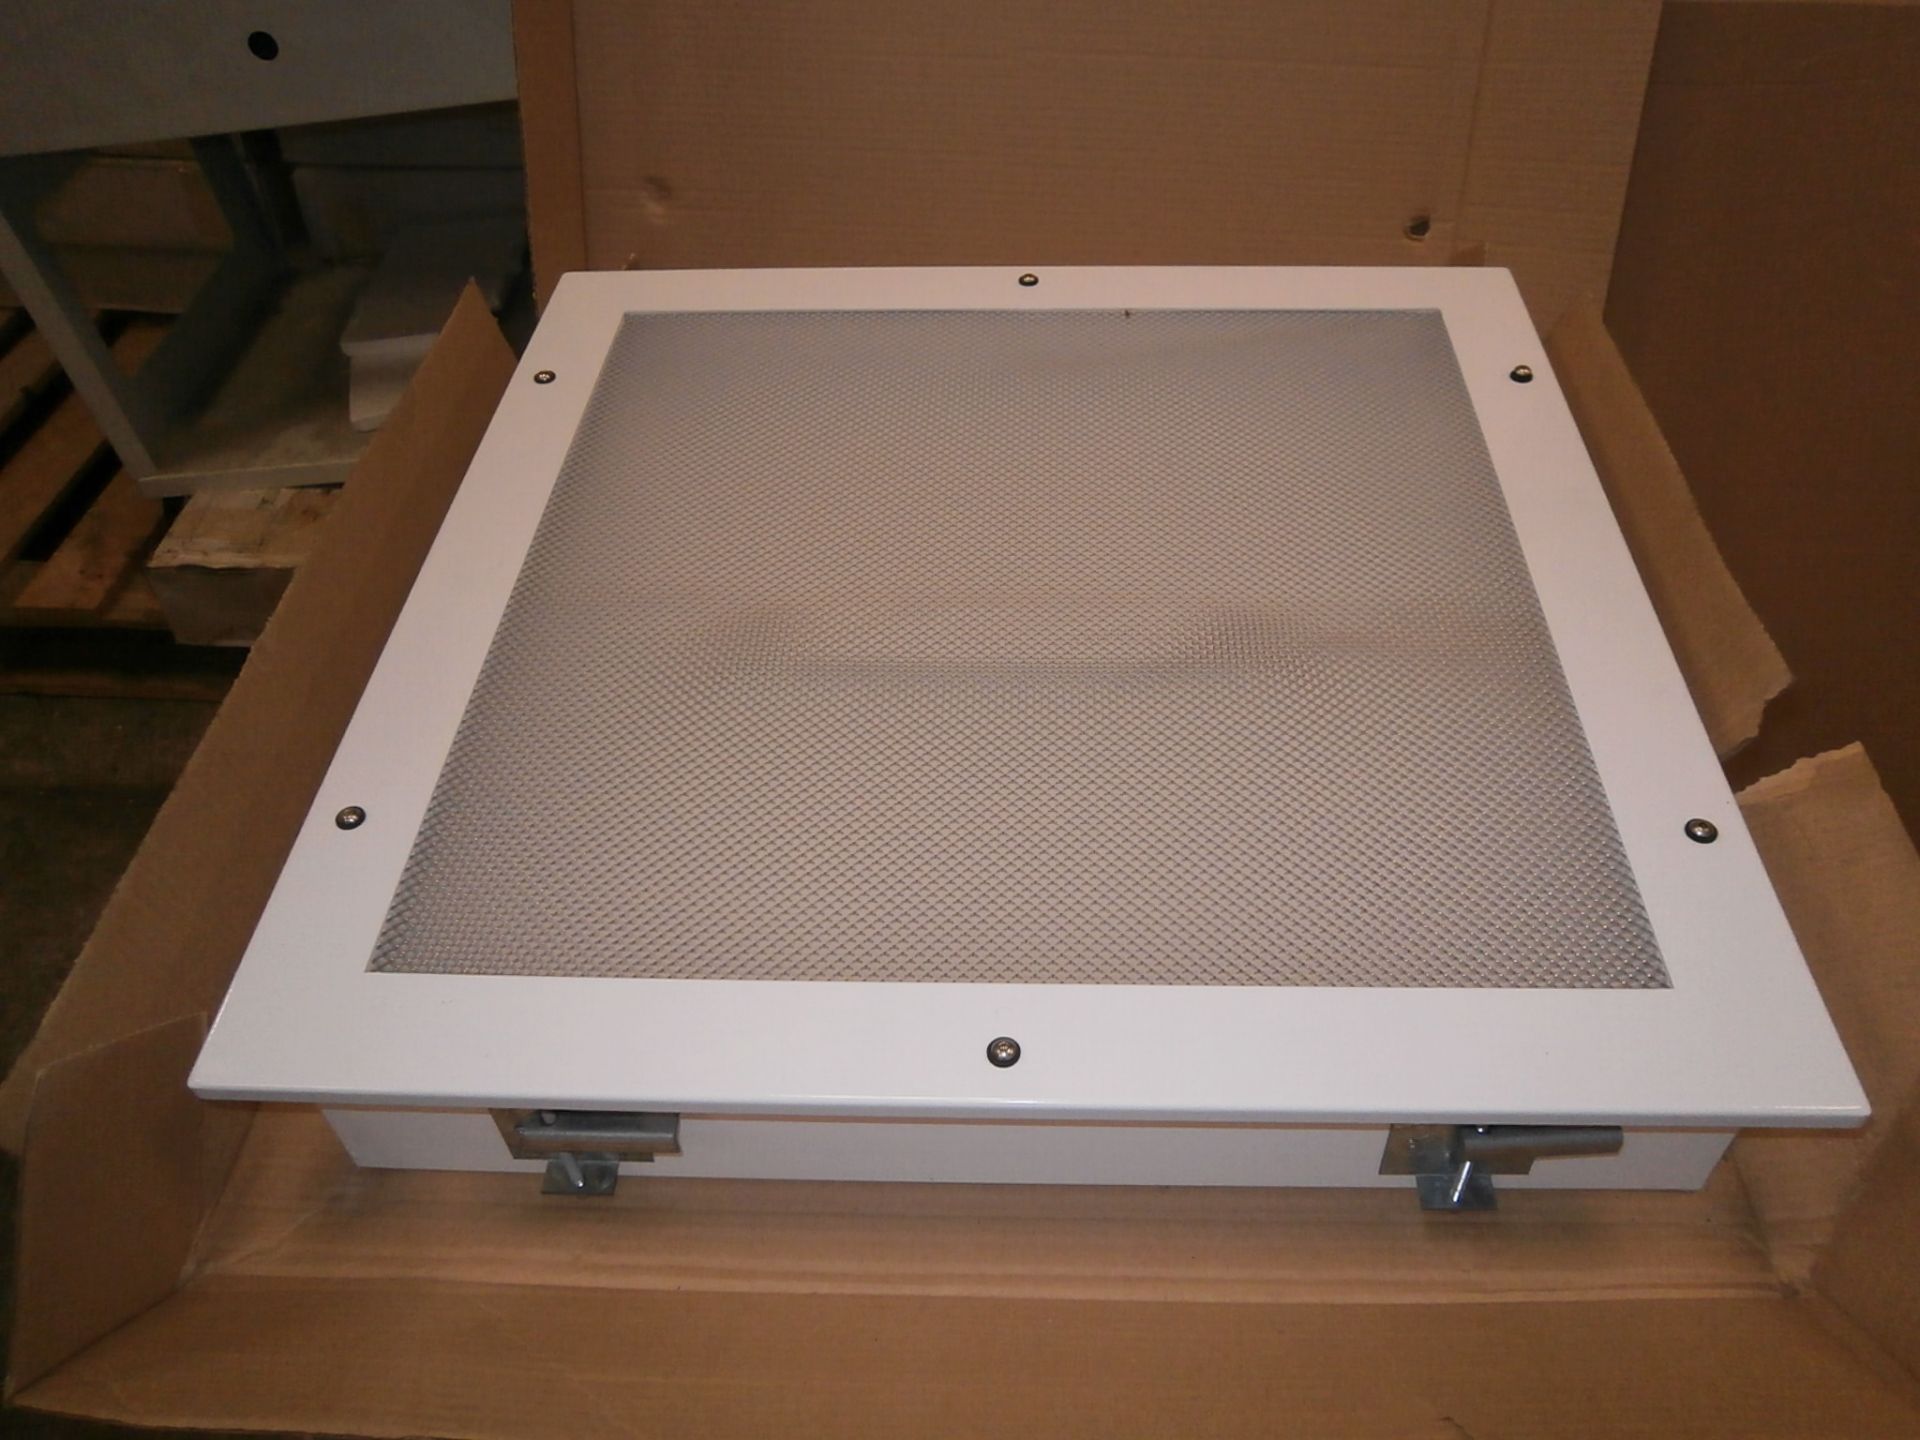 Lot Of 4 Celing Mounted Ligting Units. 4x 18w High Frequency IP65 Modular C/W TPA Prismatic Panel